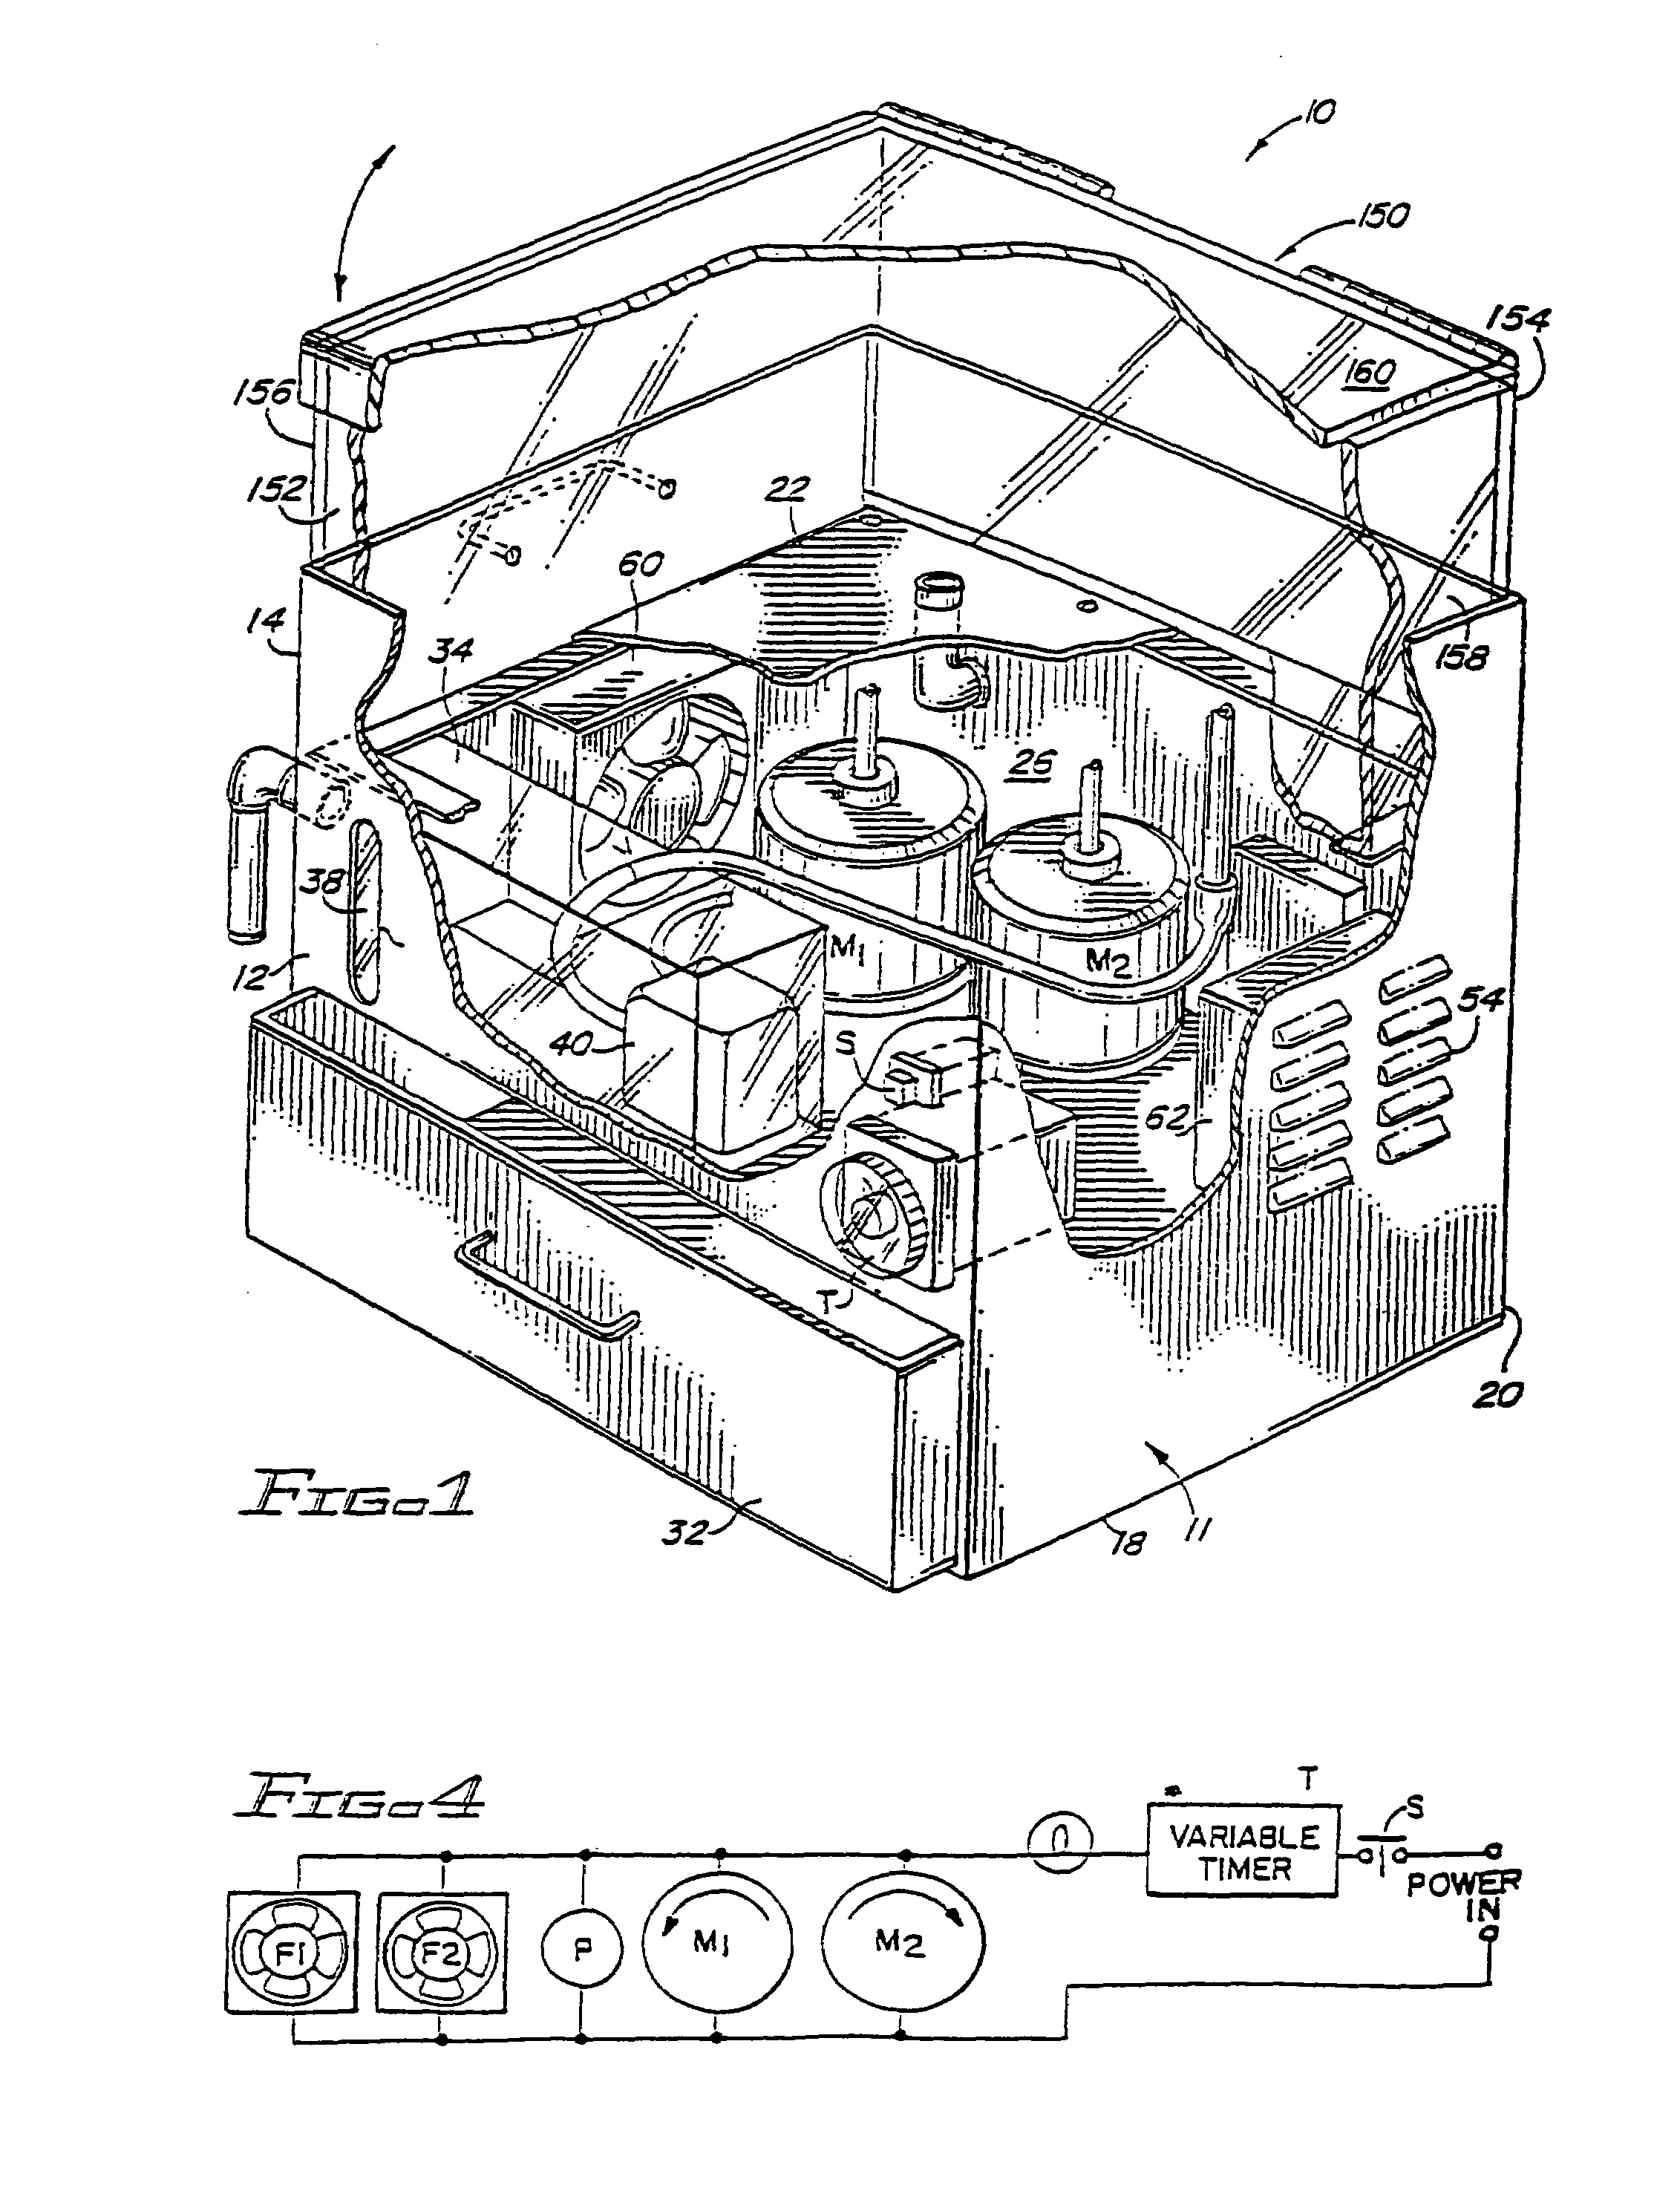 Method and apparatus for reconditioning compact discs